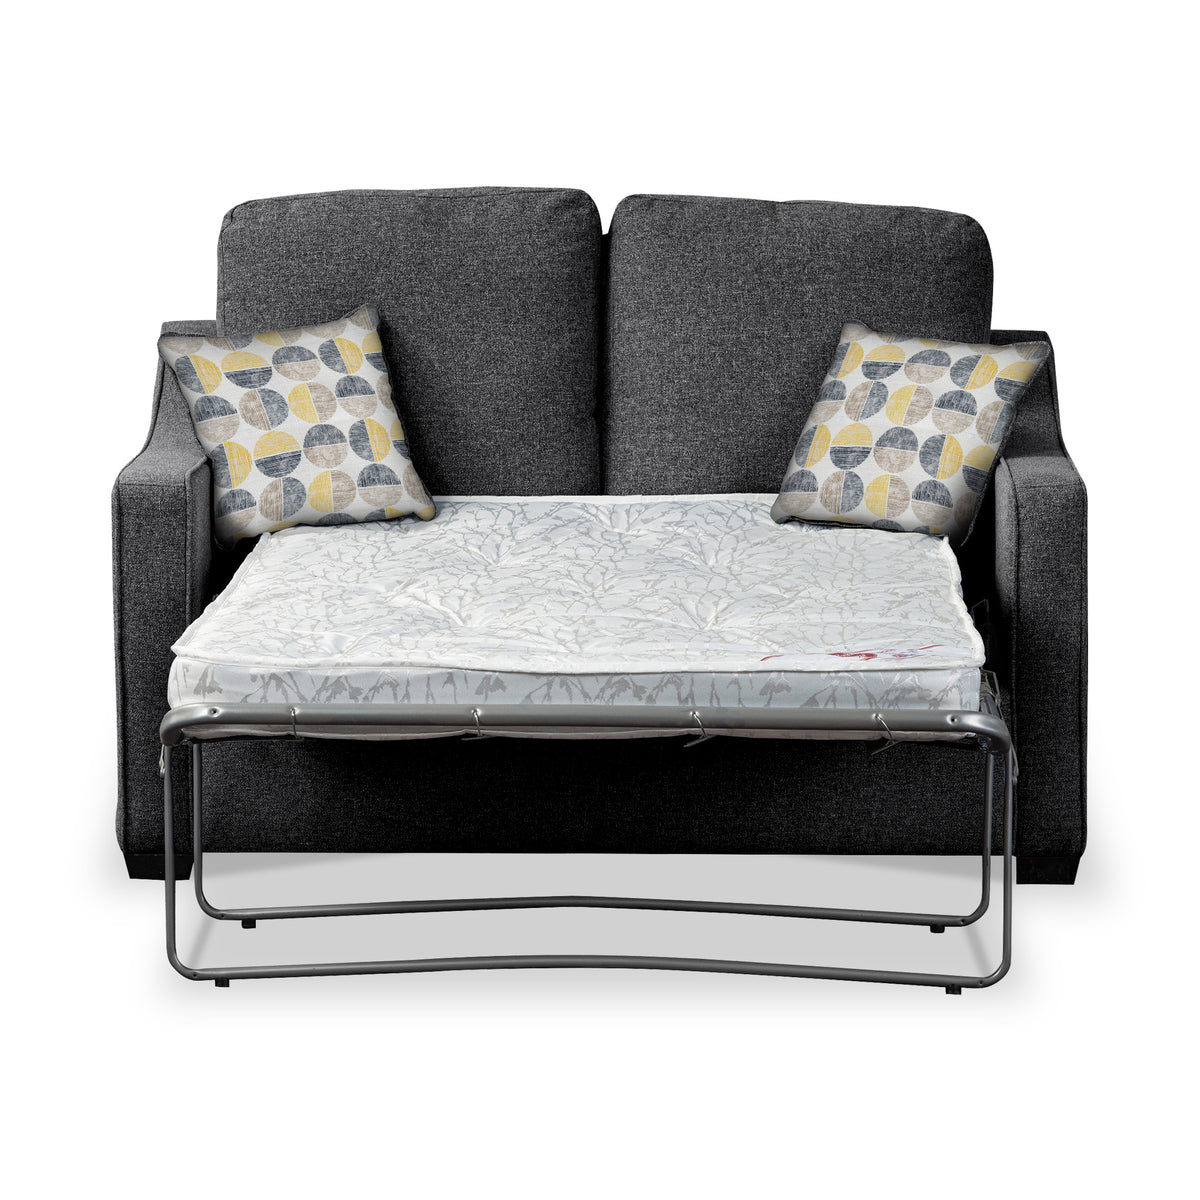 Charlcote Charcoal Faux Linen 2 Seater Sofabed with Beige Scatter Cushions from Roseland Furniture